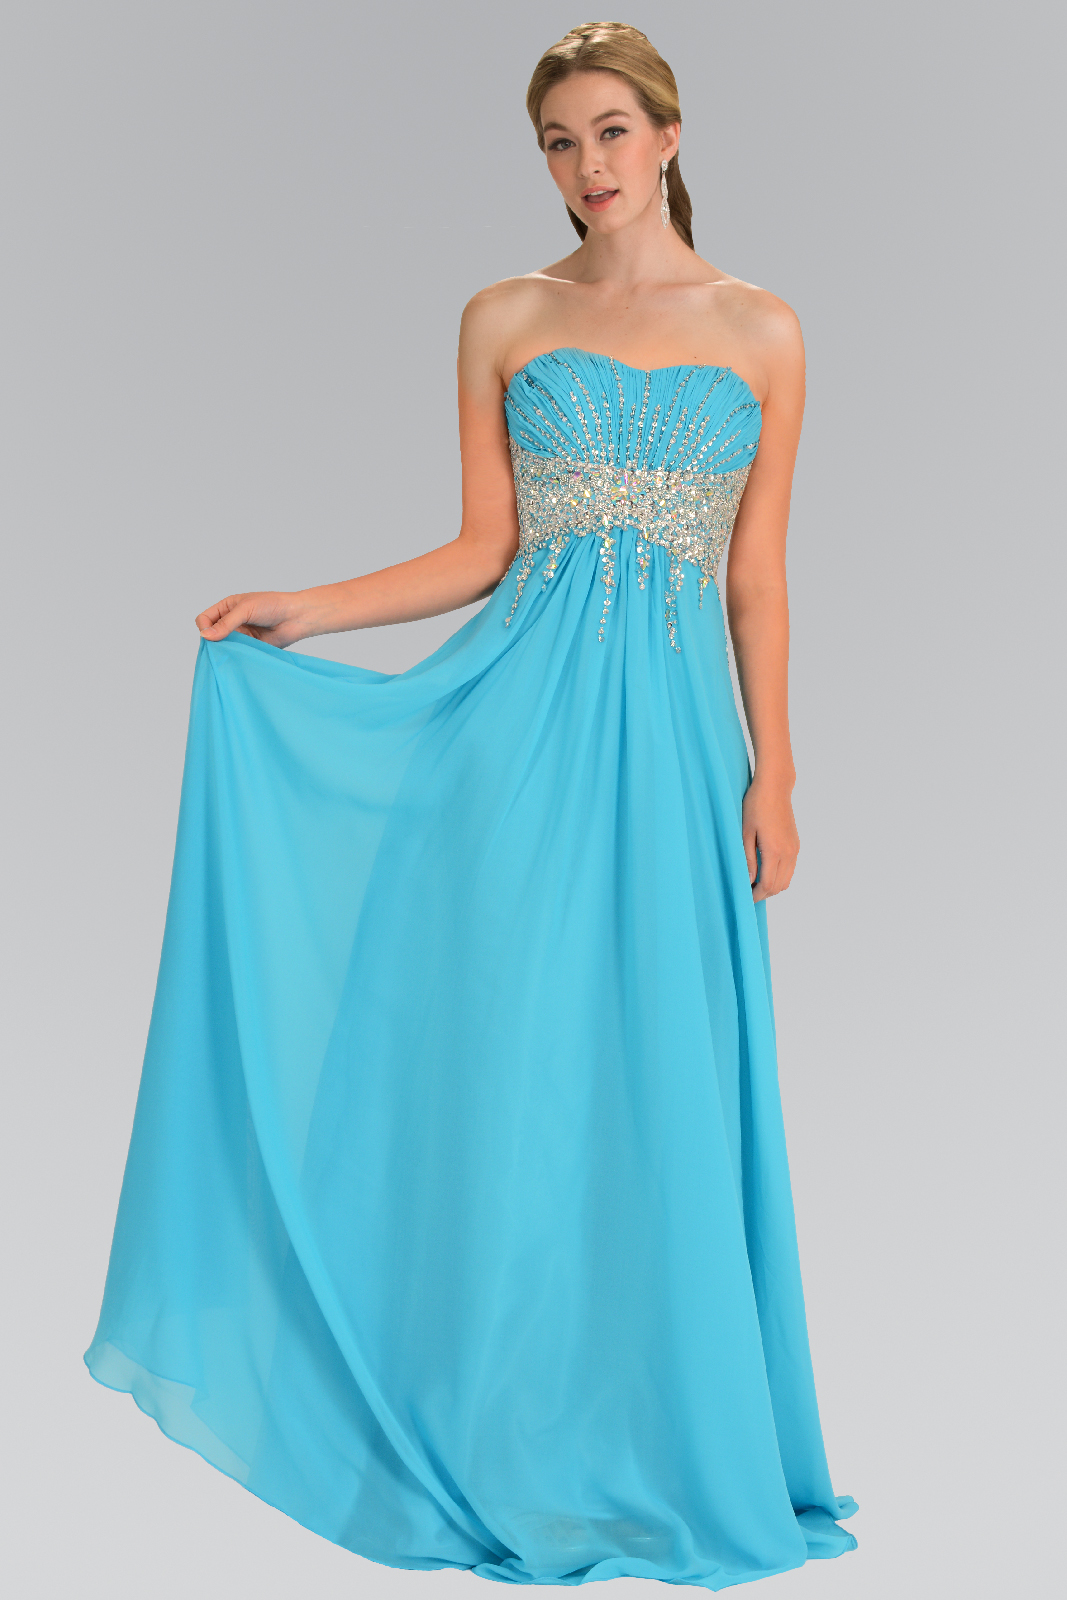 woman in blue strapless gown